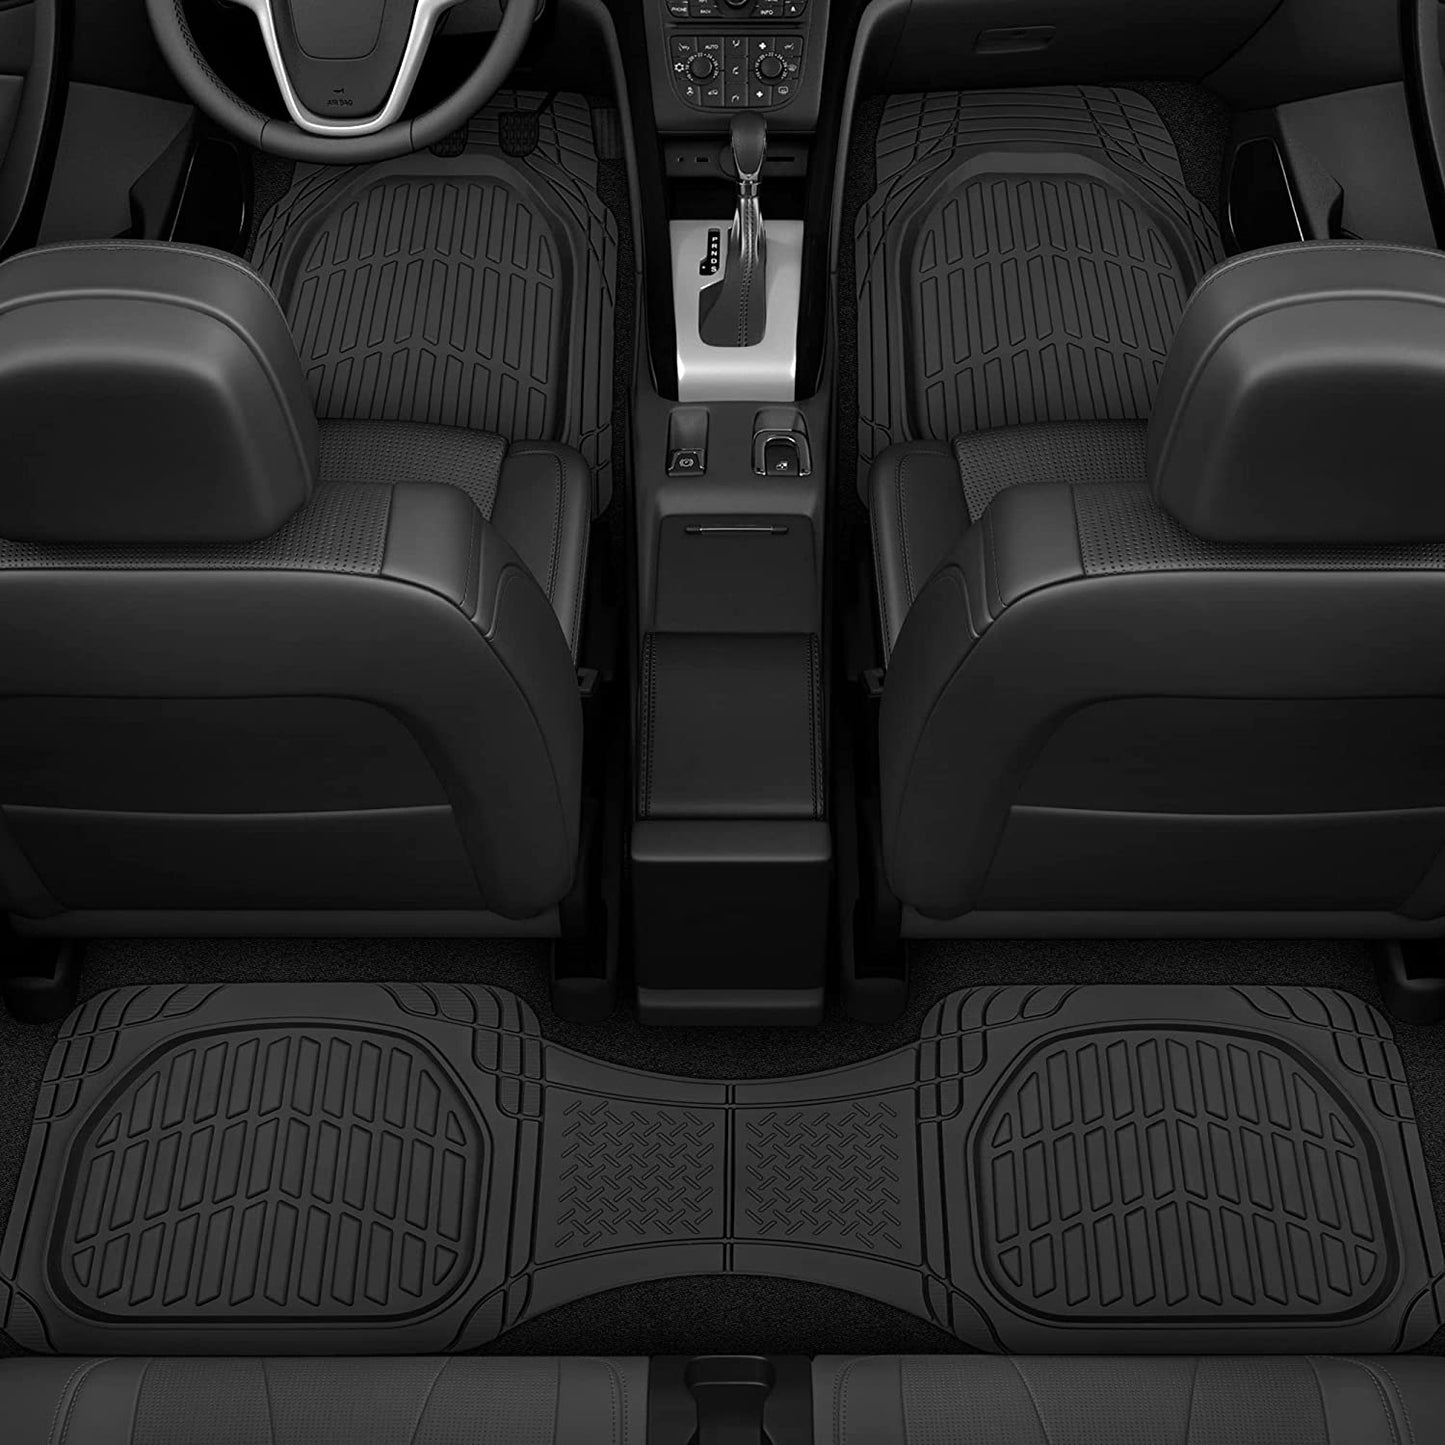 Universal Black All-Weather Car Floor Mats - Waterproof, Trim-To-Fit, Ideal for Cars, Trucks, and SUVs - Deep Dish Design, High-Quality Automotive Floor Liners